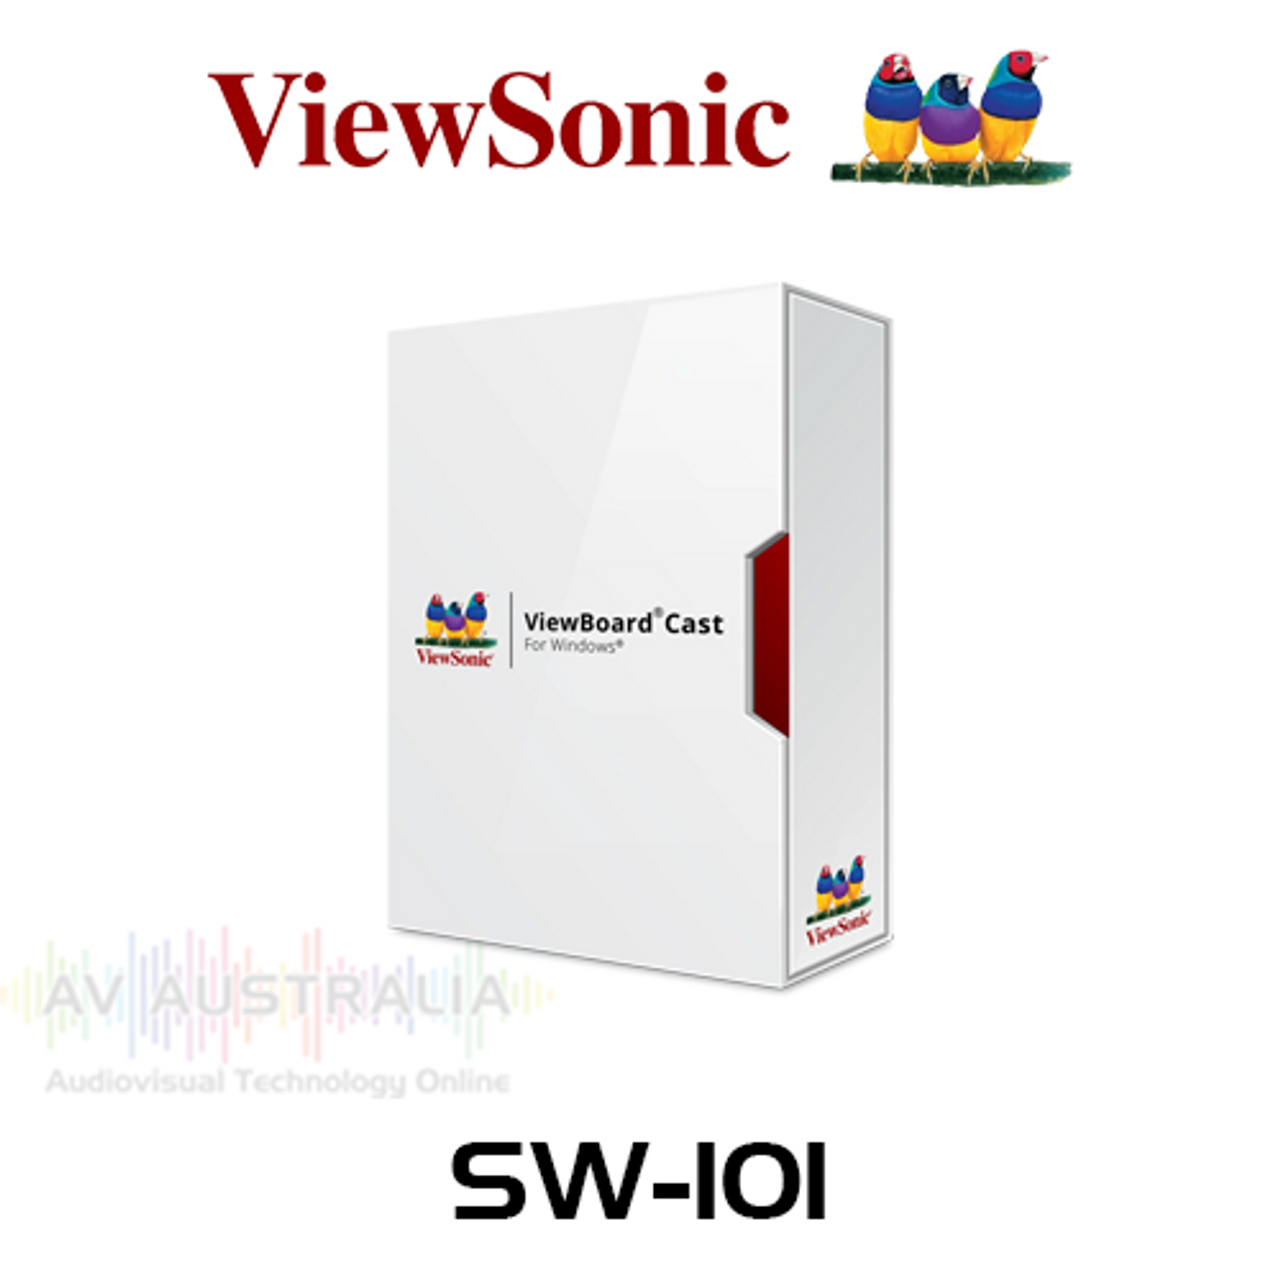 Viewsonic SW-101 Software License Key For vCast Windows